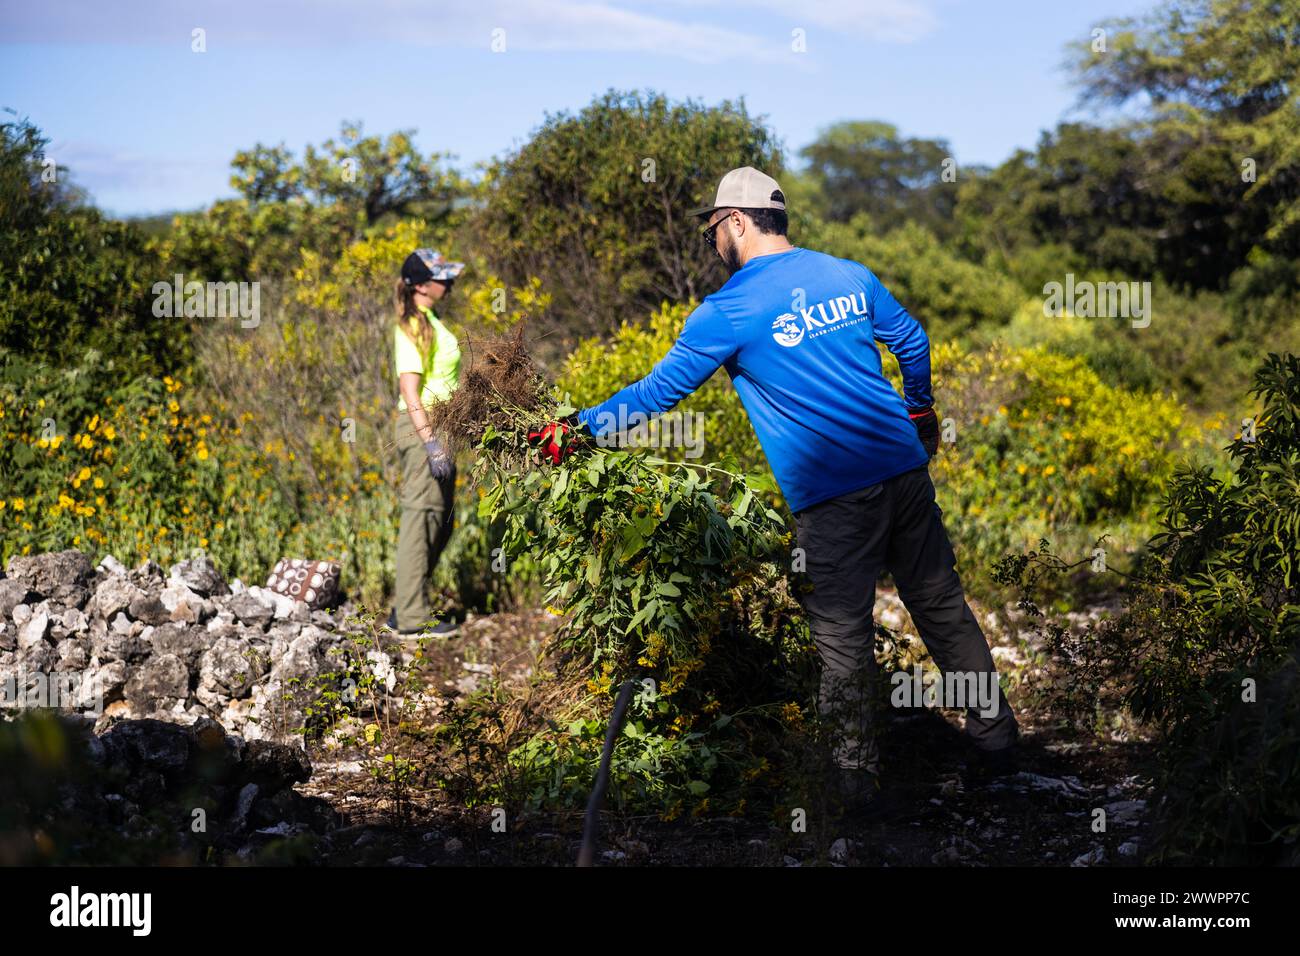 Nick Sinchek, Kalaeloa Heritage Park volunteer, removes invasive plants from Kalaeloa Heritage Park during a Weed Warriors event held in Kapolei, HI, Feb. 23, 2024. The Kalaeloa Heritage Park site is a relatively undisturbed, 11-acre parcel with over 177 recorded cultural sites that consist of a heiau and other habitation sites. Marine Corps Base Hawaii’s Environmental Compliance and Protection Division established the Weed Warriors program to aid in the management of invasive plant species with the support from community members. Stock Photo